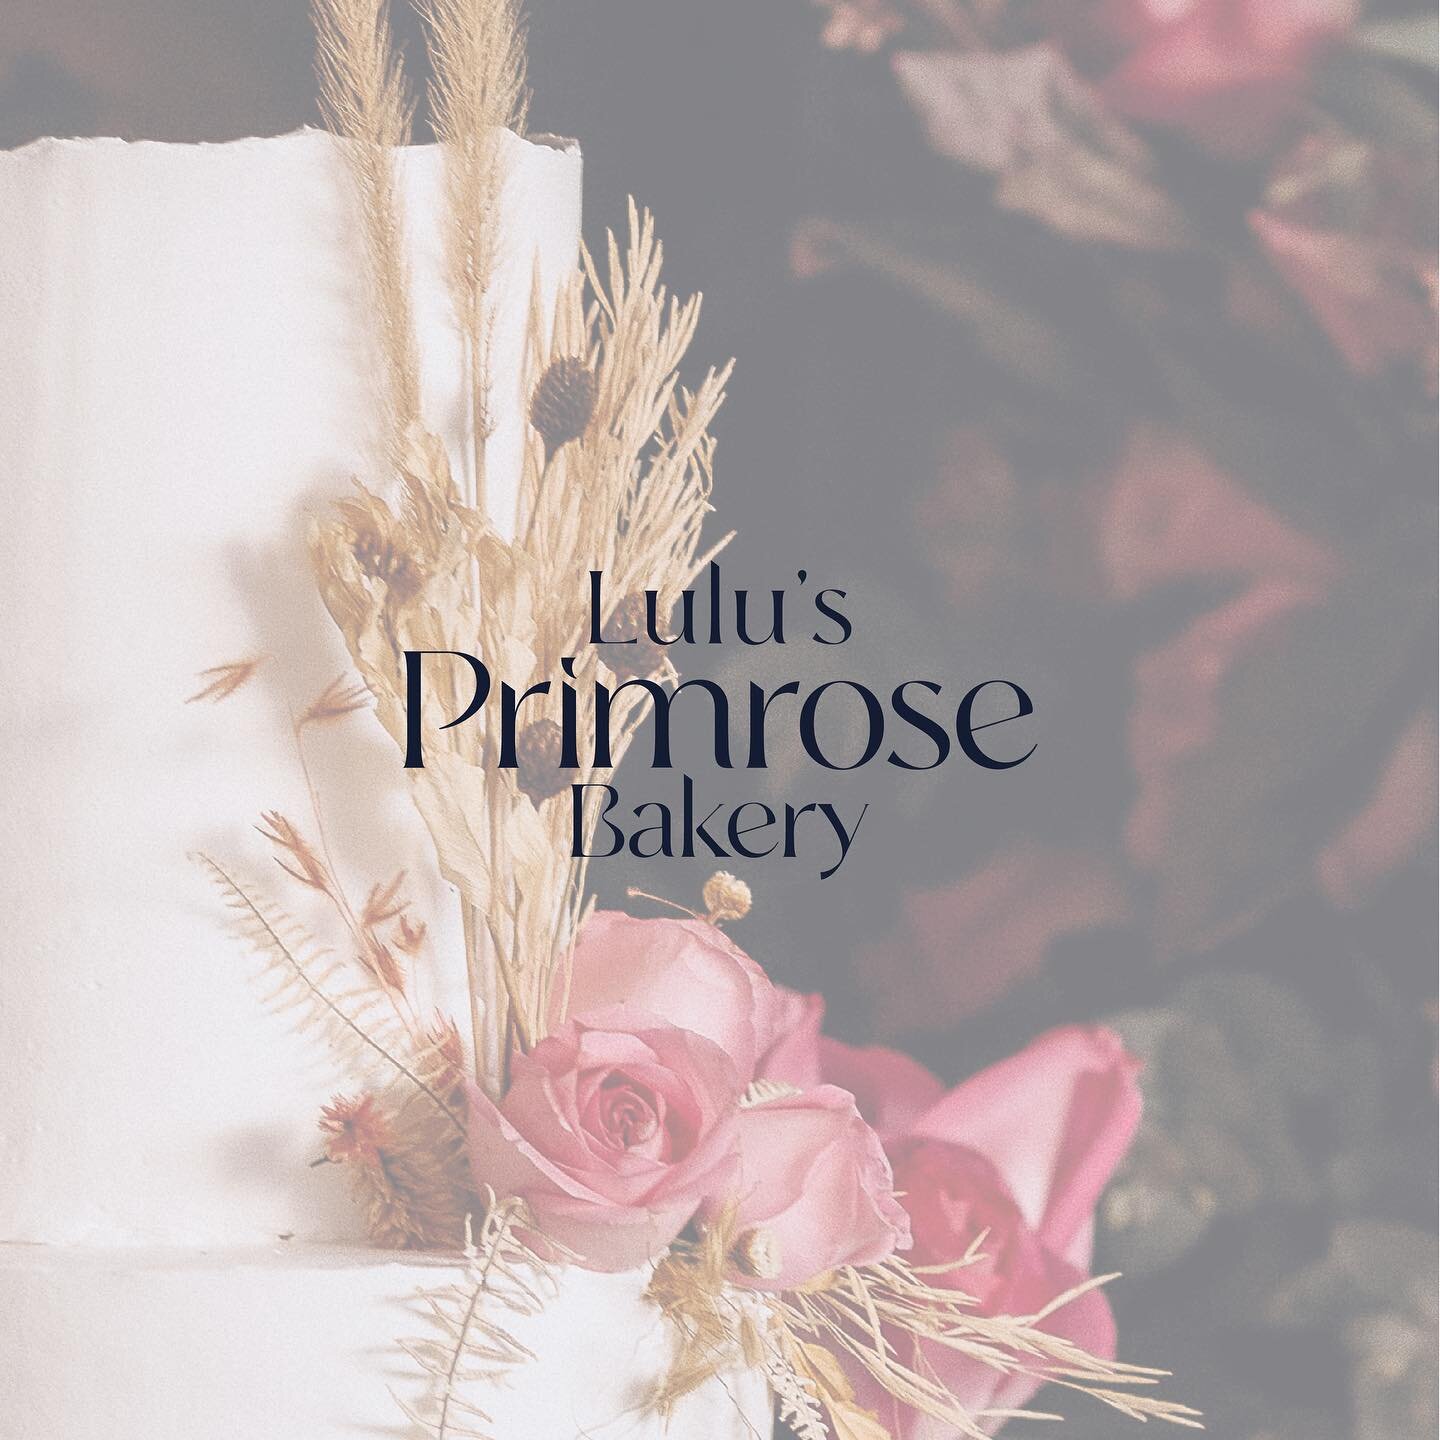 🤍It&rsquo;s all in a name🤍 

A question I get asked every now and again is &ldquo;why Lulus&rsquo;s &lsquo;Primrose&rsquo; Bakery&rdquo;? So let&rsquo;s answer that question! 

The &lsquo;Primrose&rsquo; is synonymous with my business in so many wa